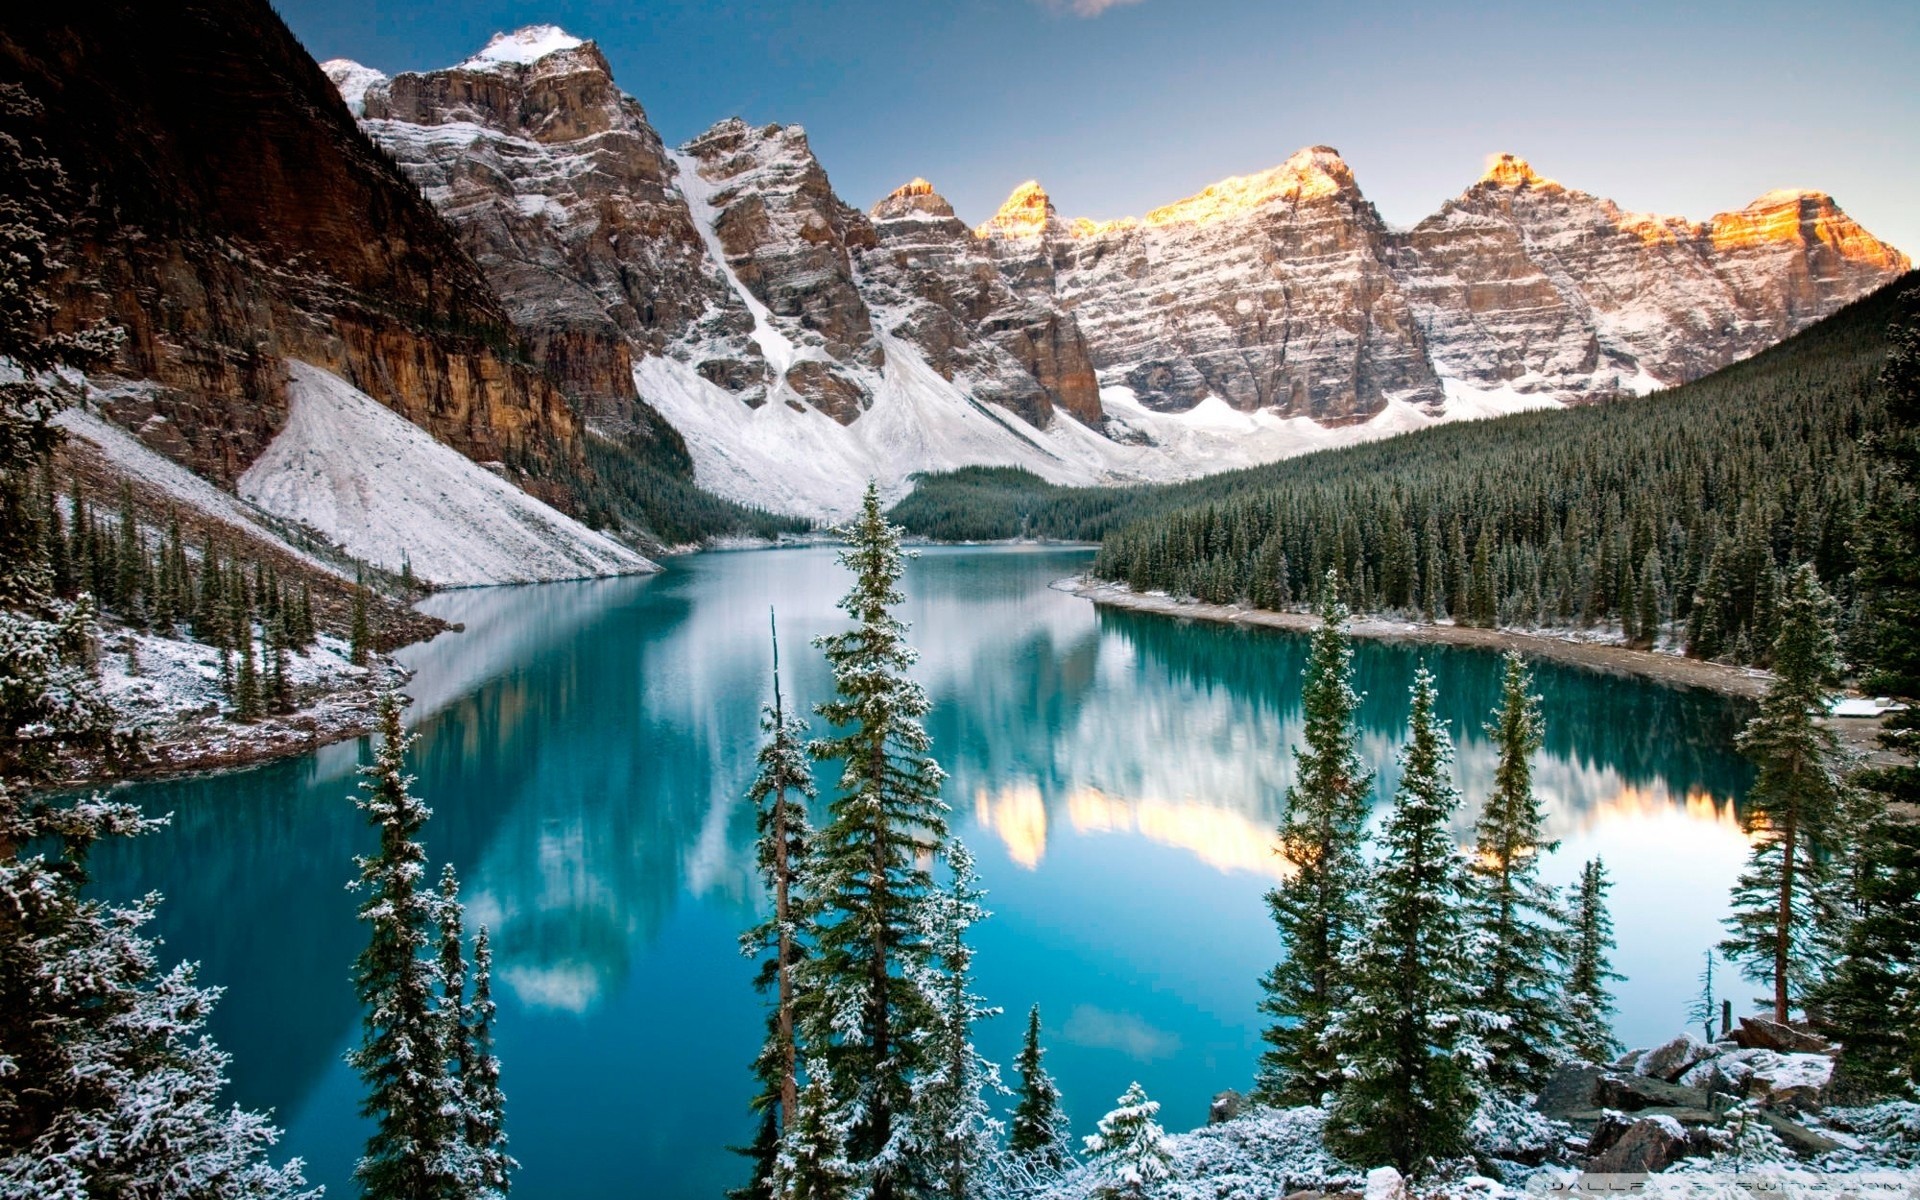 General 1920x1200 landscape winter mountains forest lake reflection Banff National Park Moraine Lake Canada pine trees valley nature trees snow